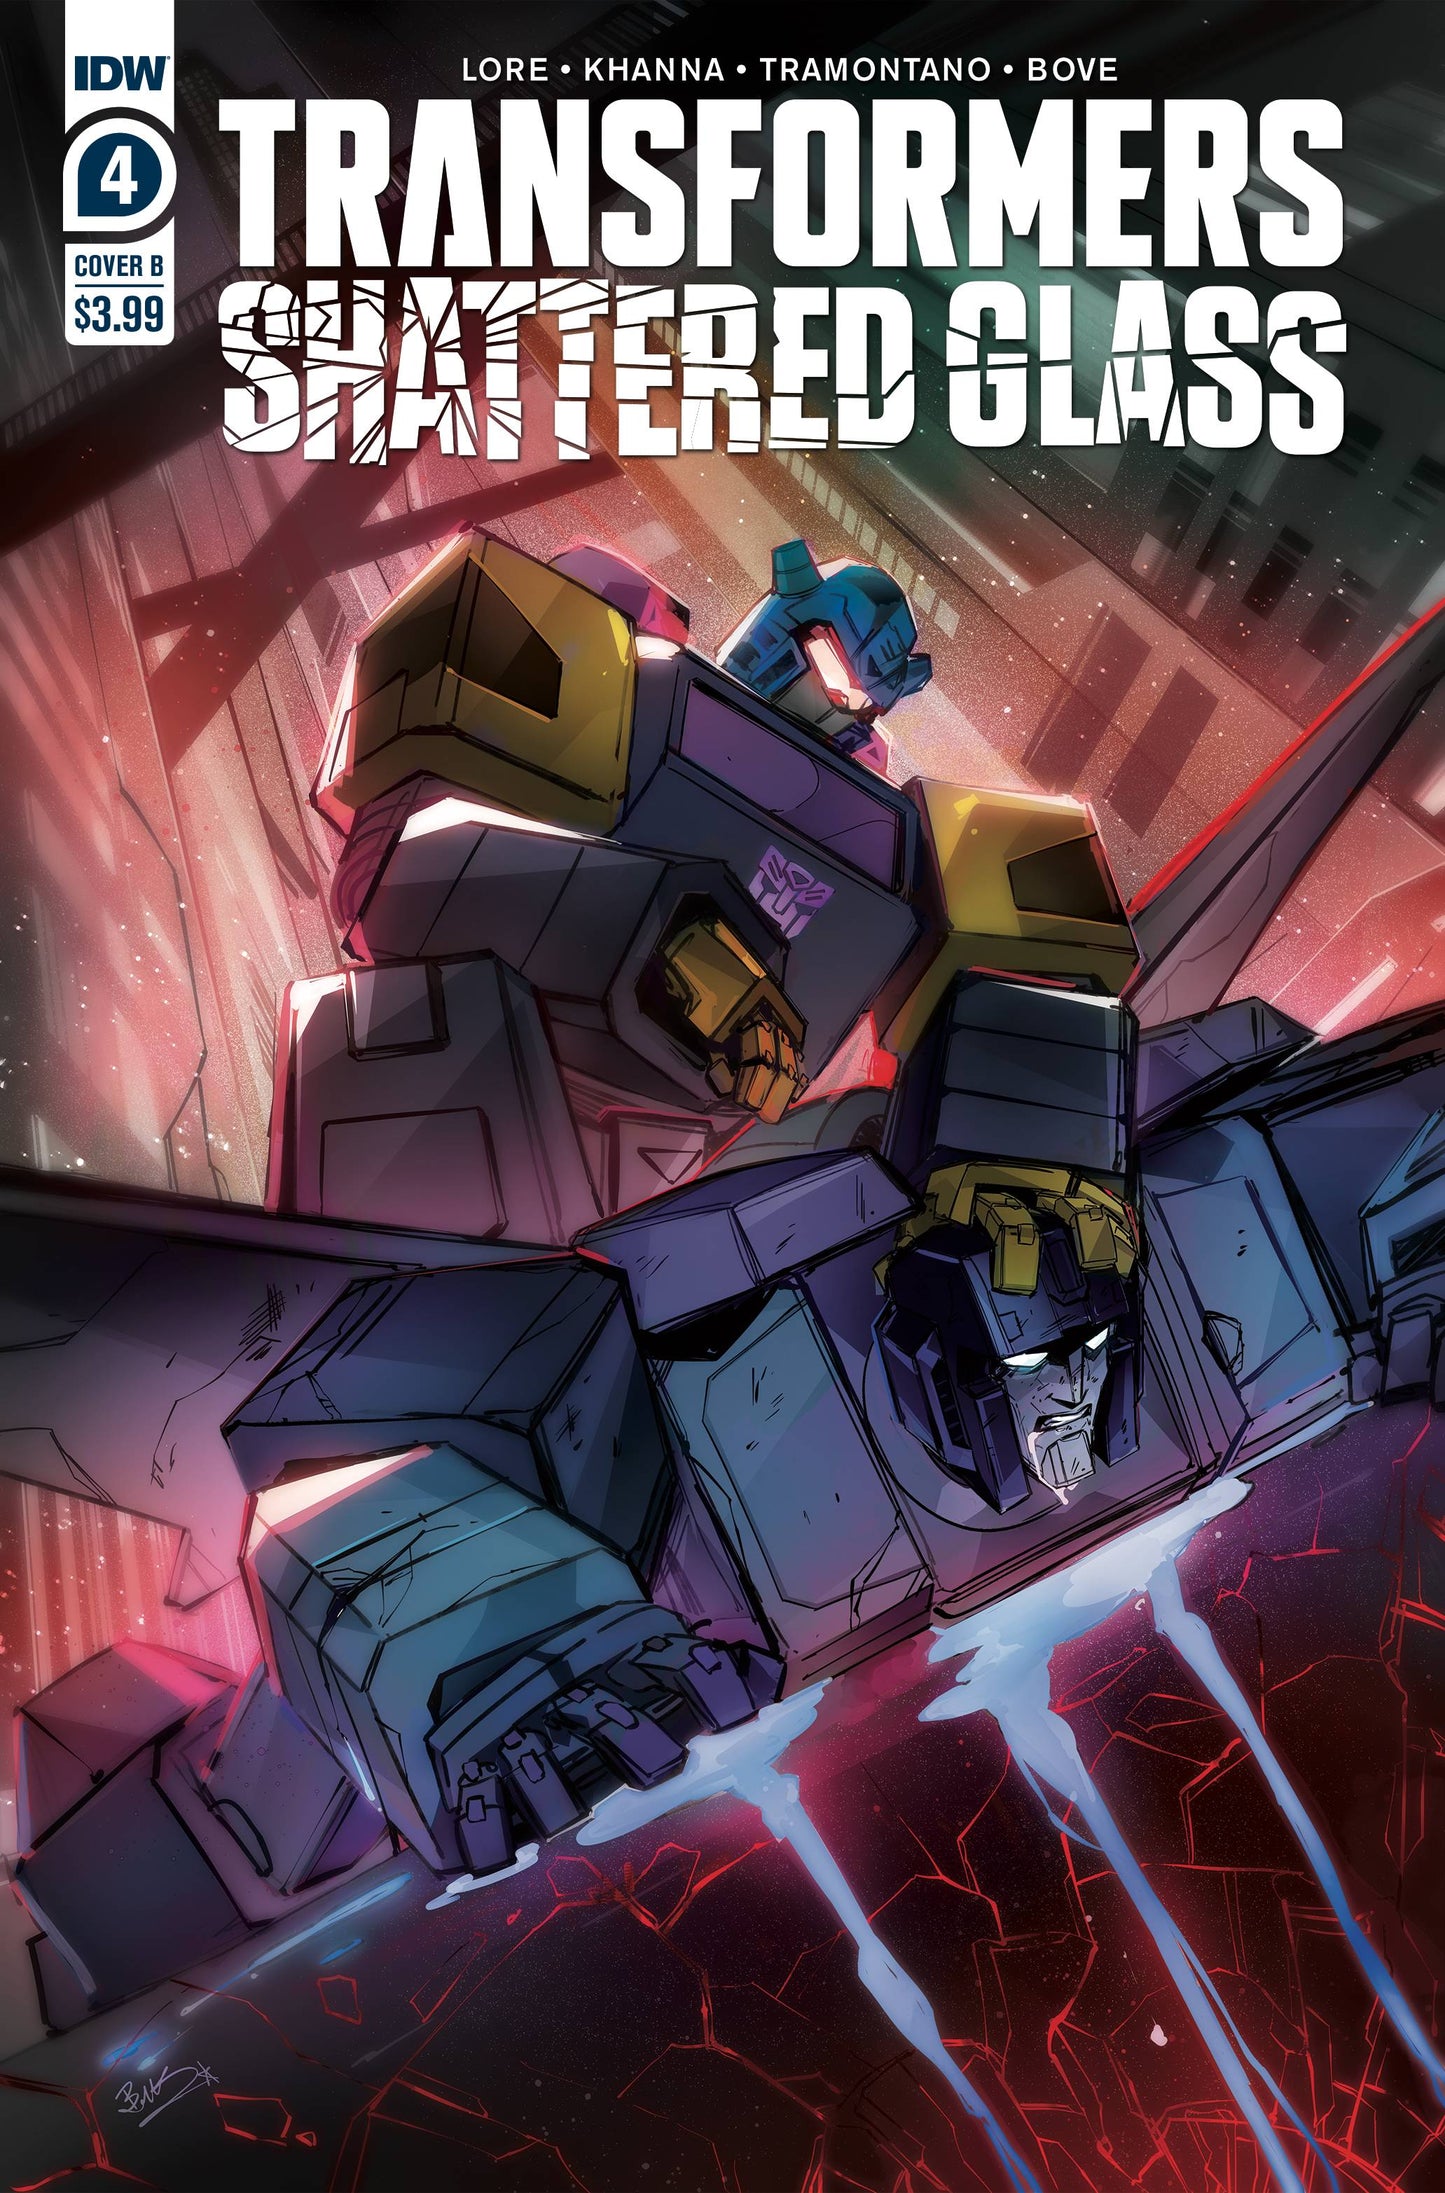 TRANSFORMERS SHATTERED GLASS #4 (OF 5) CVR B MCGUIRE-SMITH